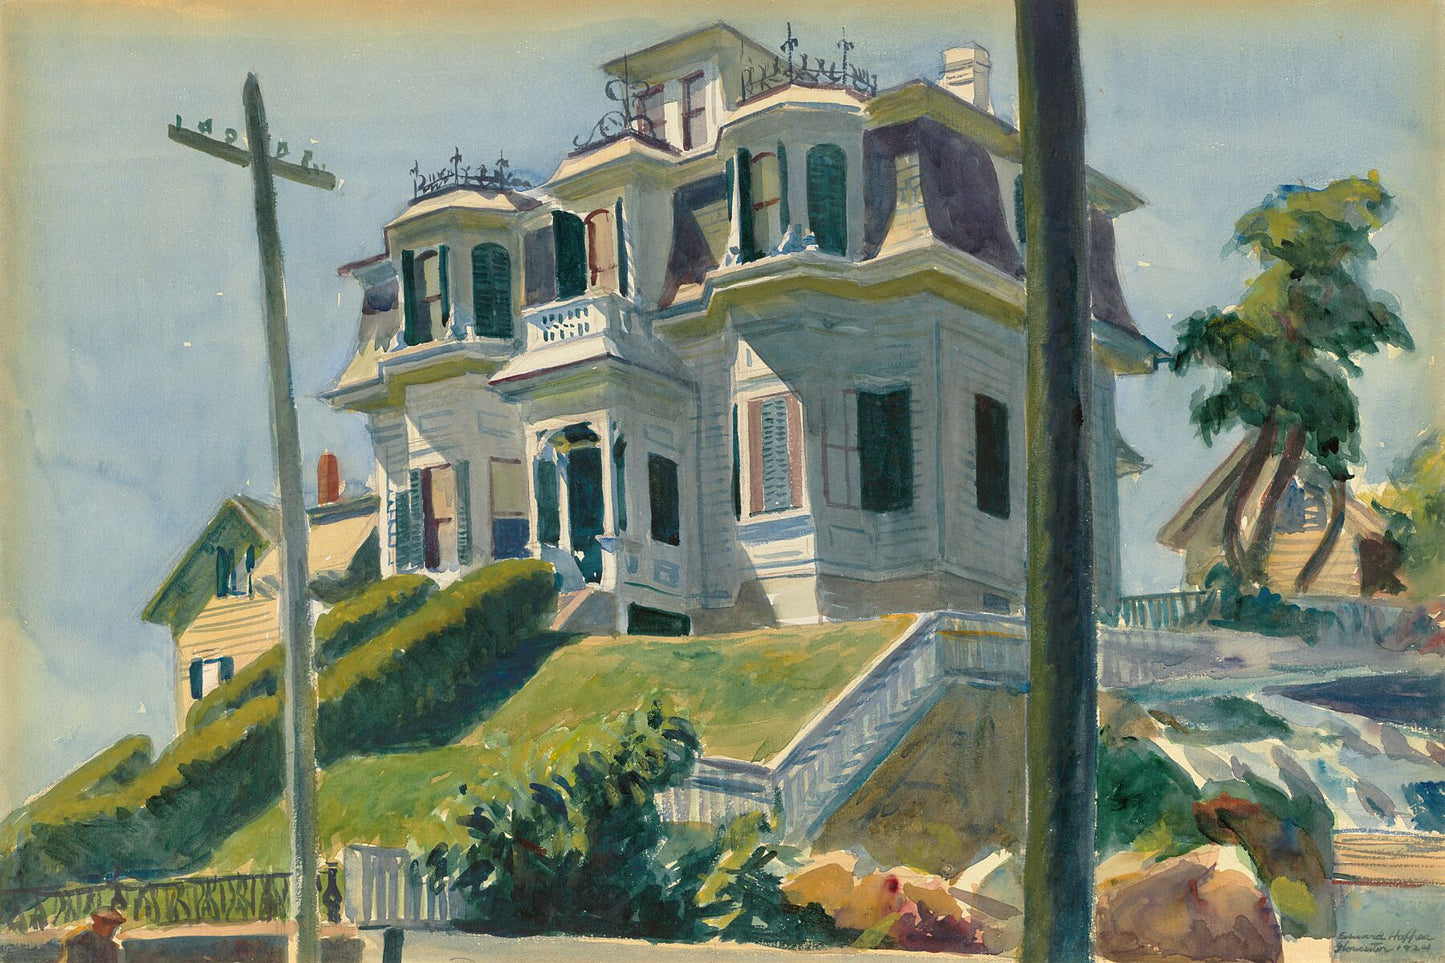 Haskell's House by Edward Hopper - 1924